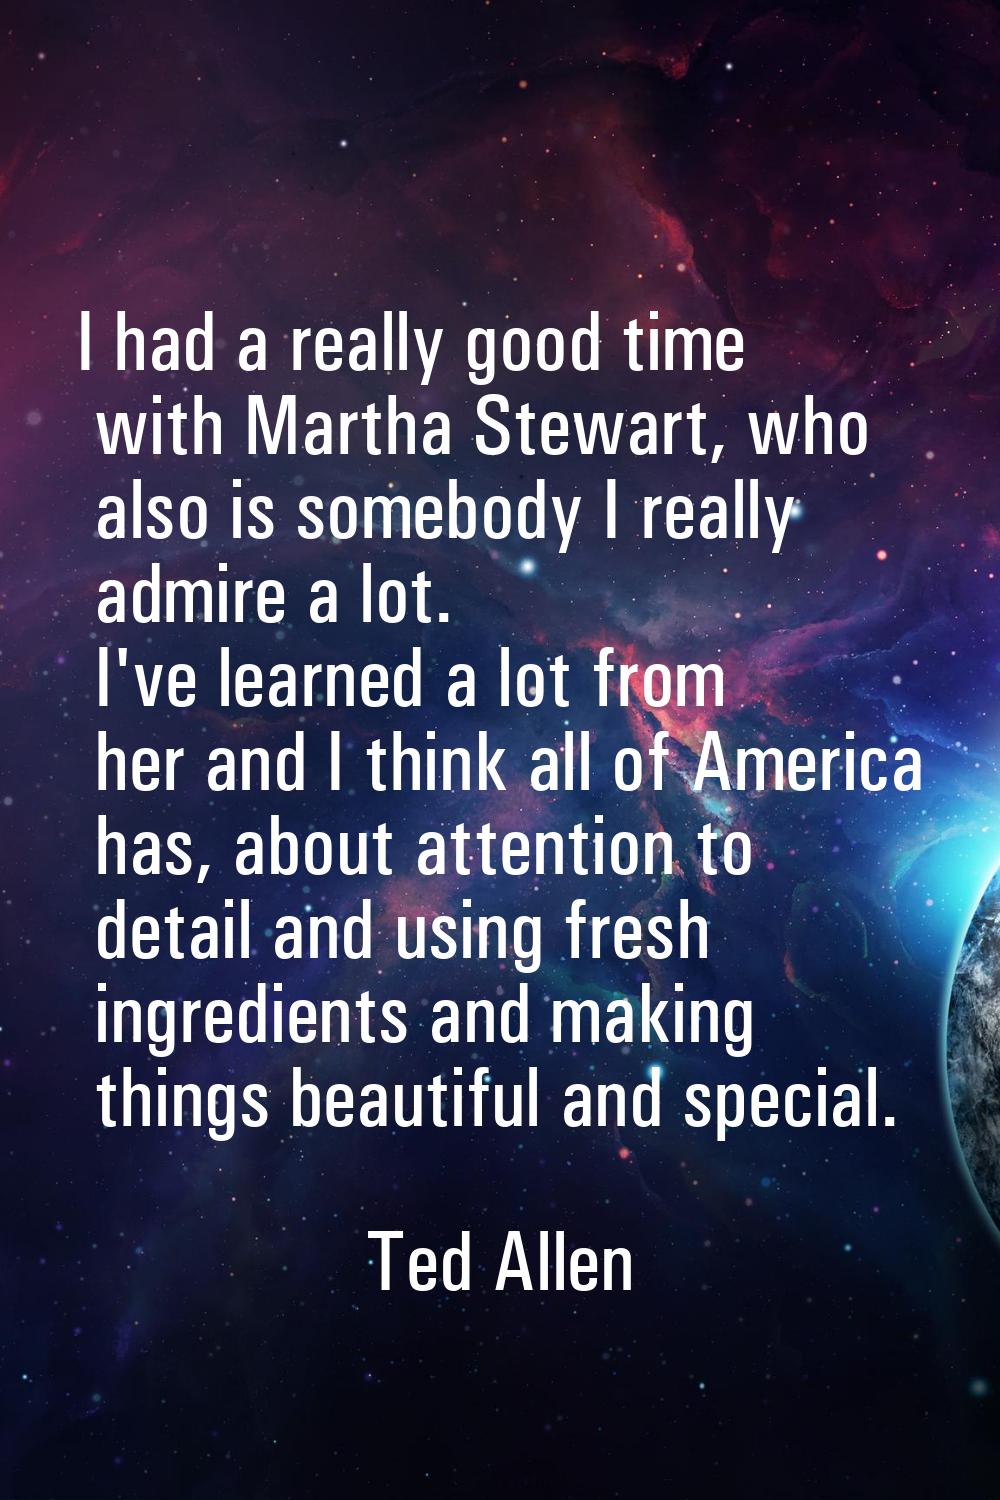 I had a really good time with Martha Stewart, who also is somebody I really admire a lot. I've lear